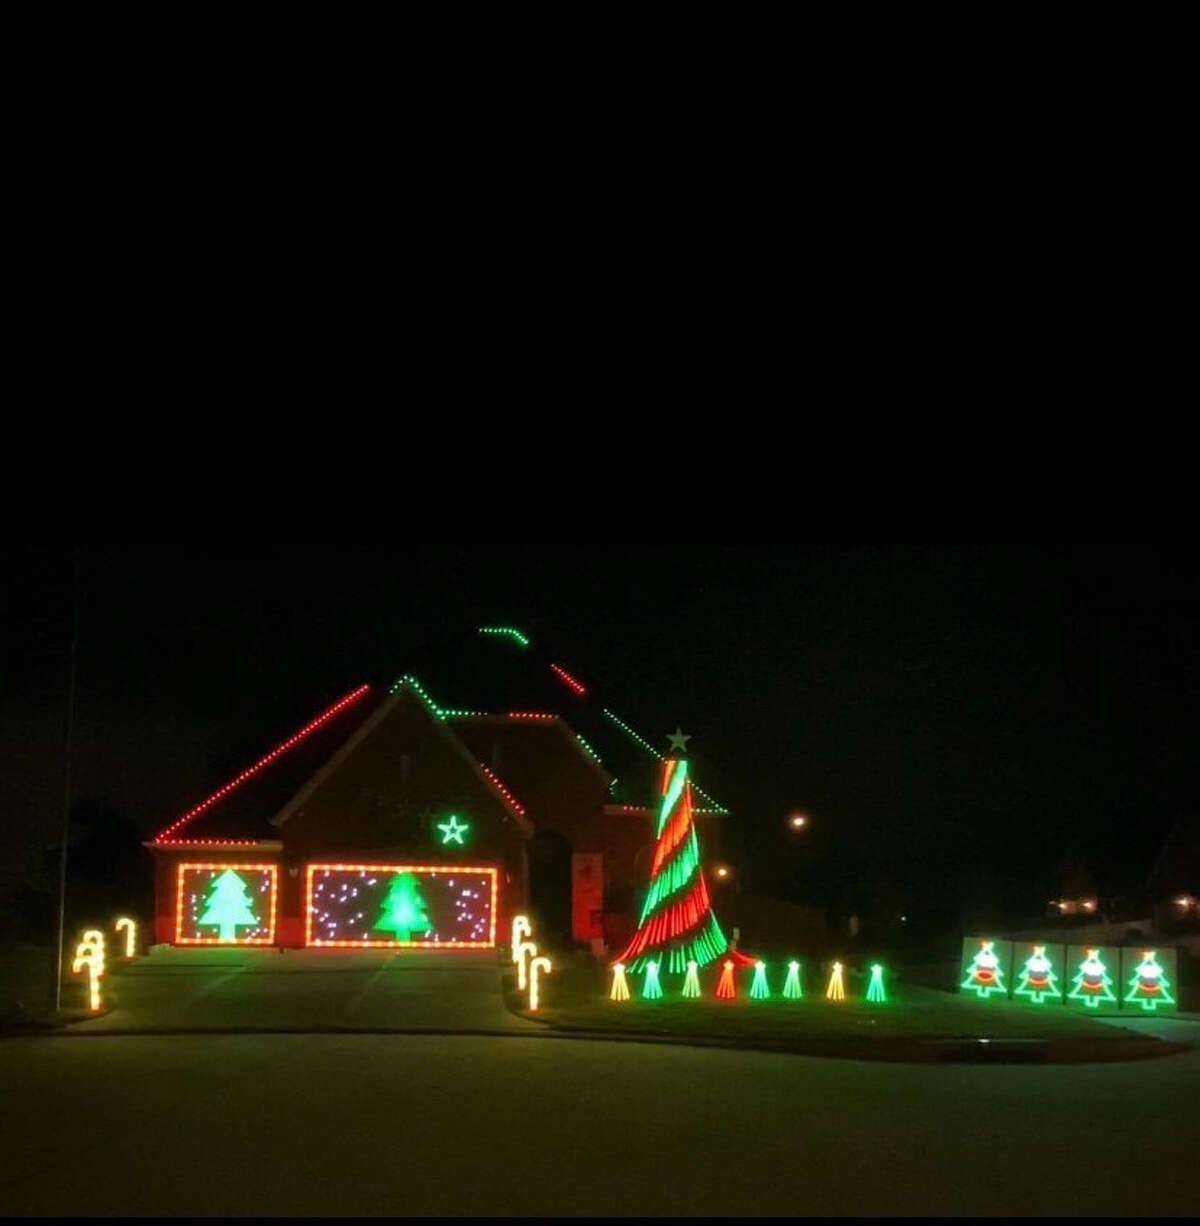 Frankie To-ong's Spring, Texas home Christmas decorations have become popular on TikTok for its synchronization to rapper Lil' Jon's classic hit "Snap Yo Fingers"